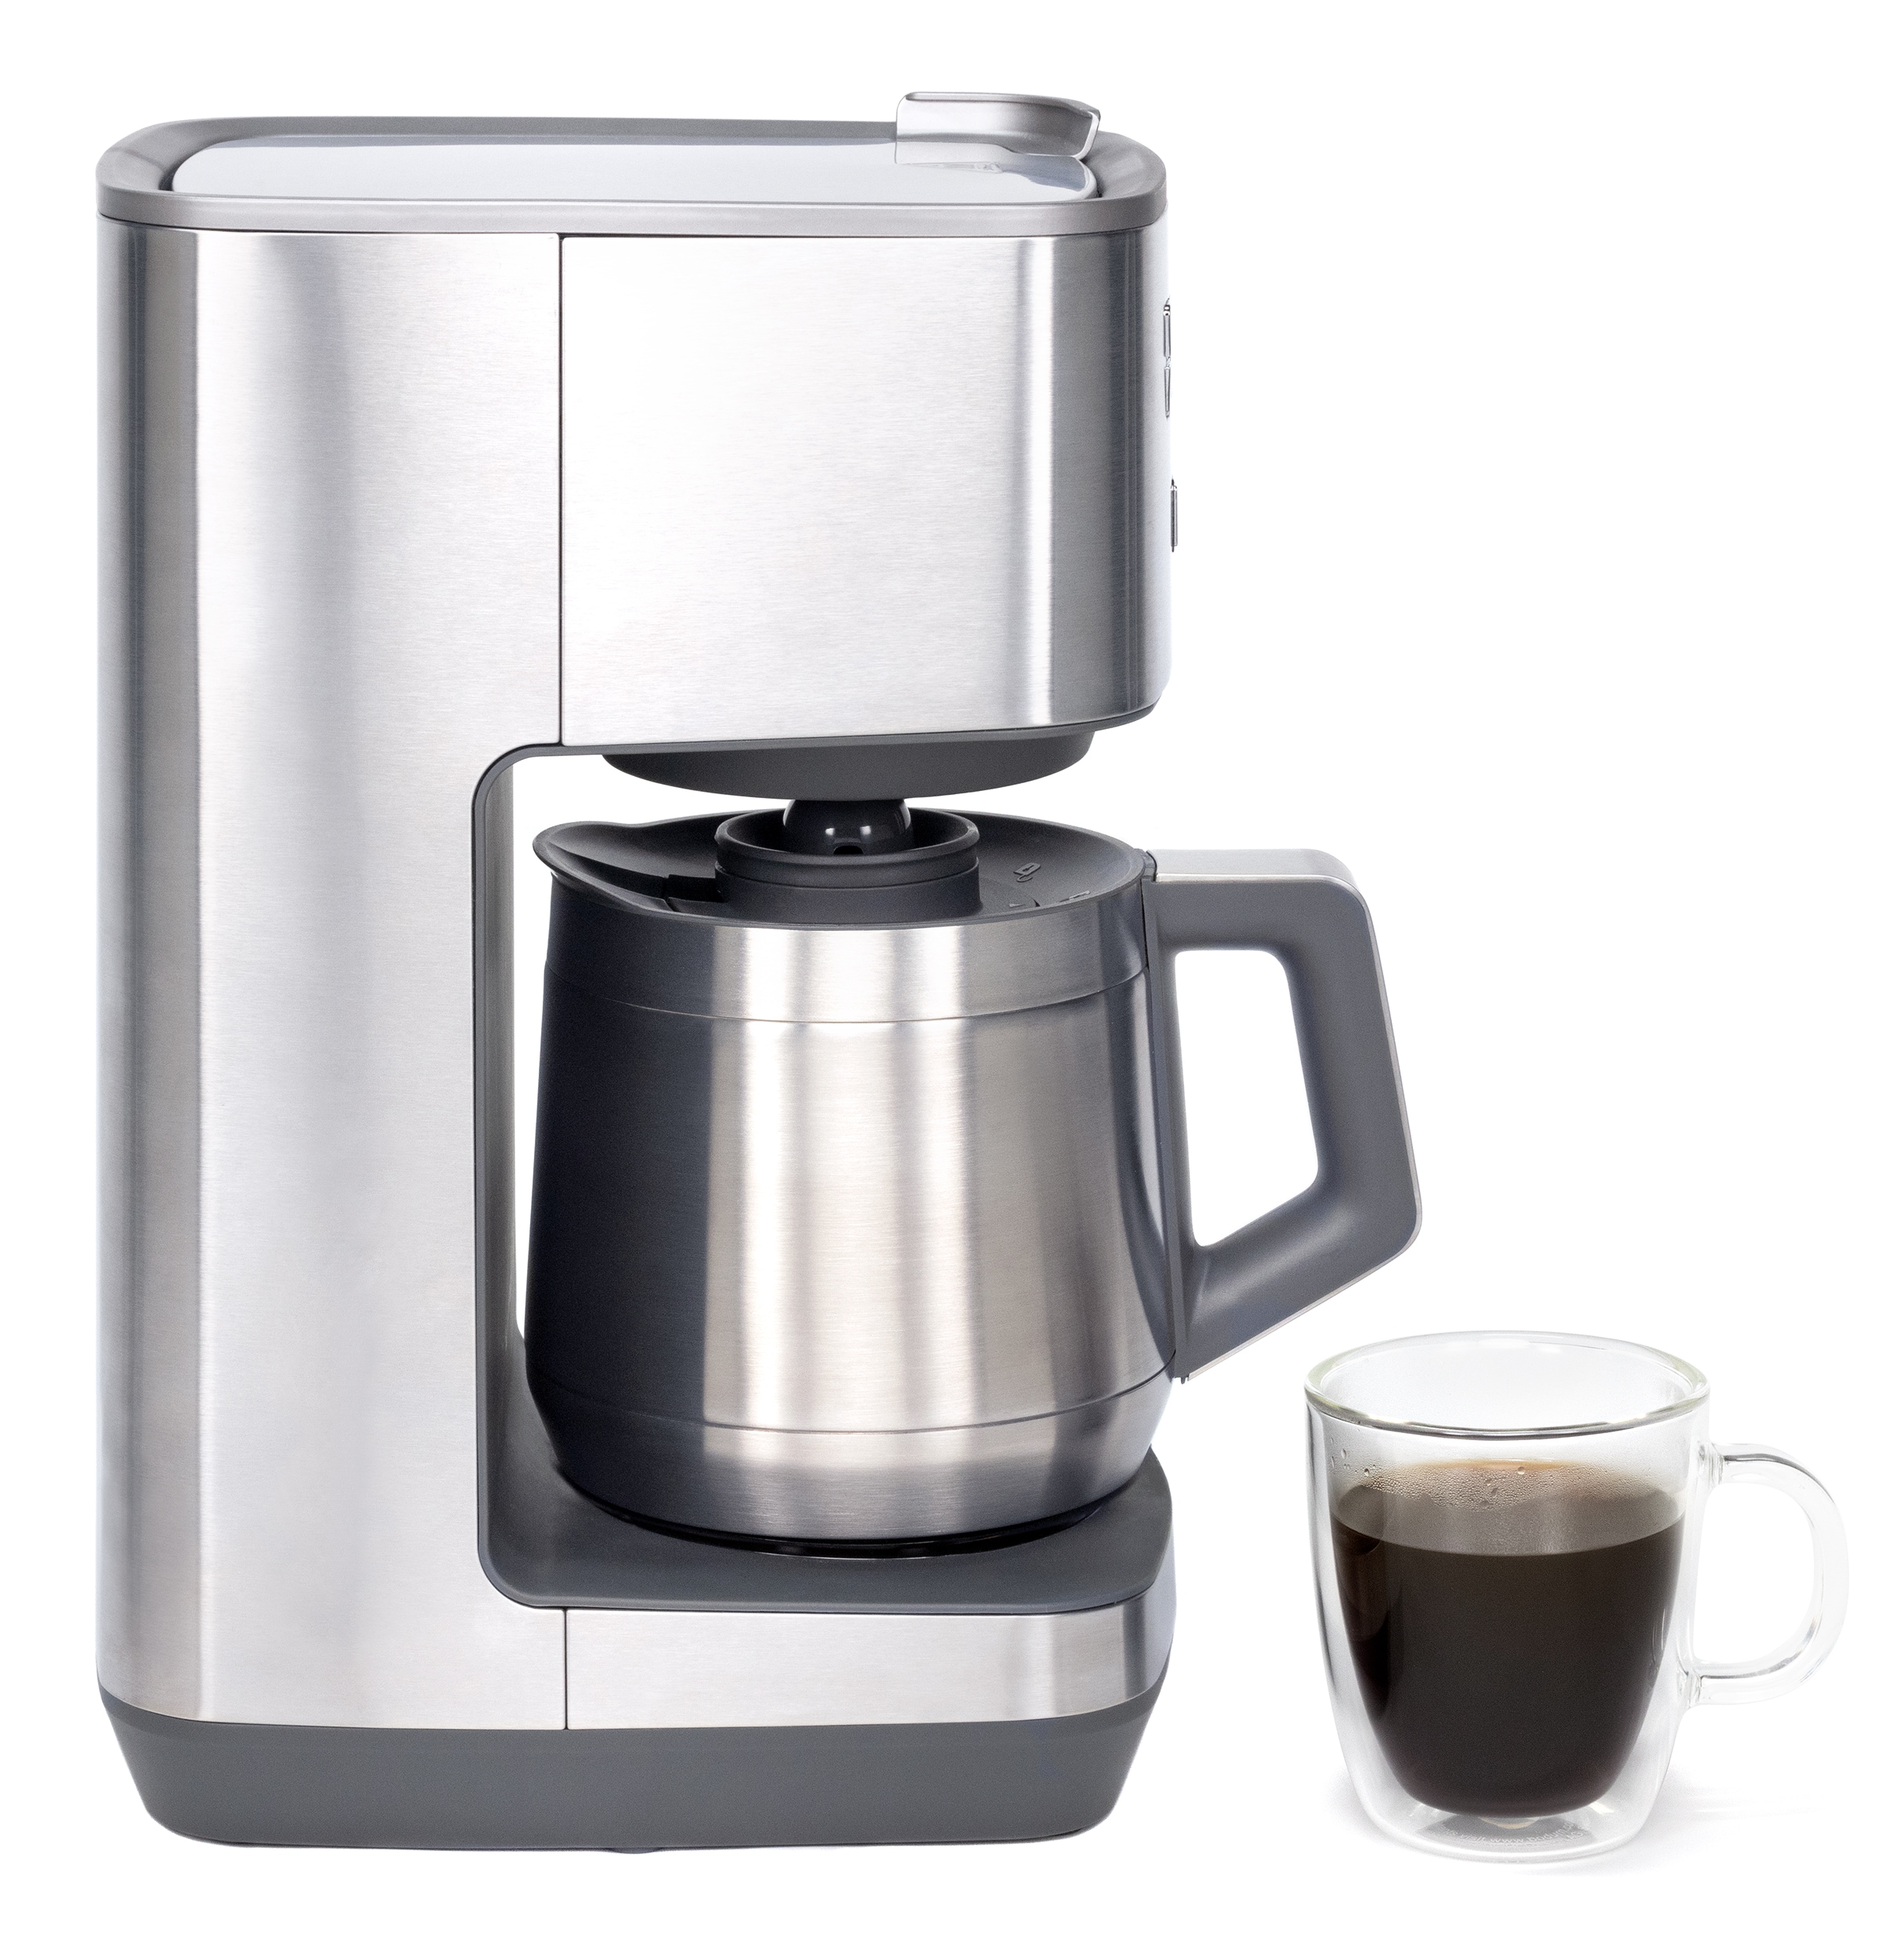 TrueBrew Drip Coffee Maker Stainless with Thermal Carafe